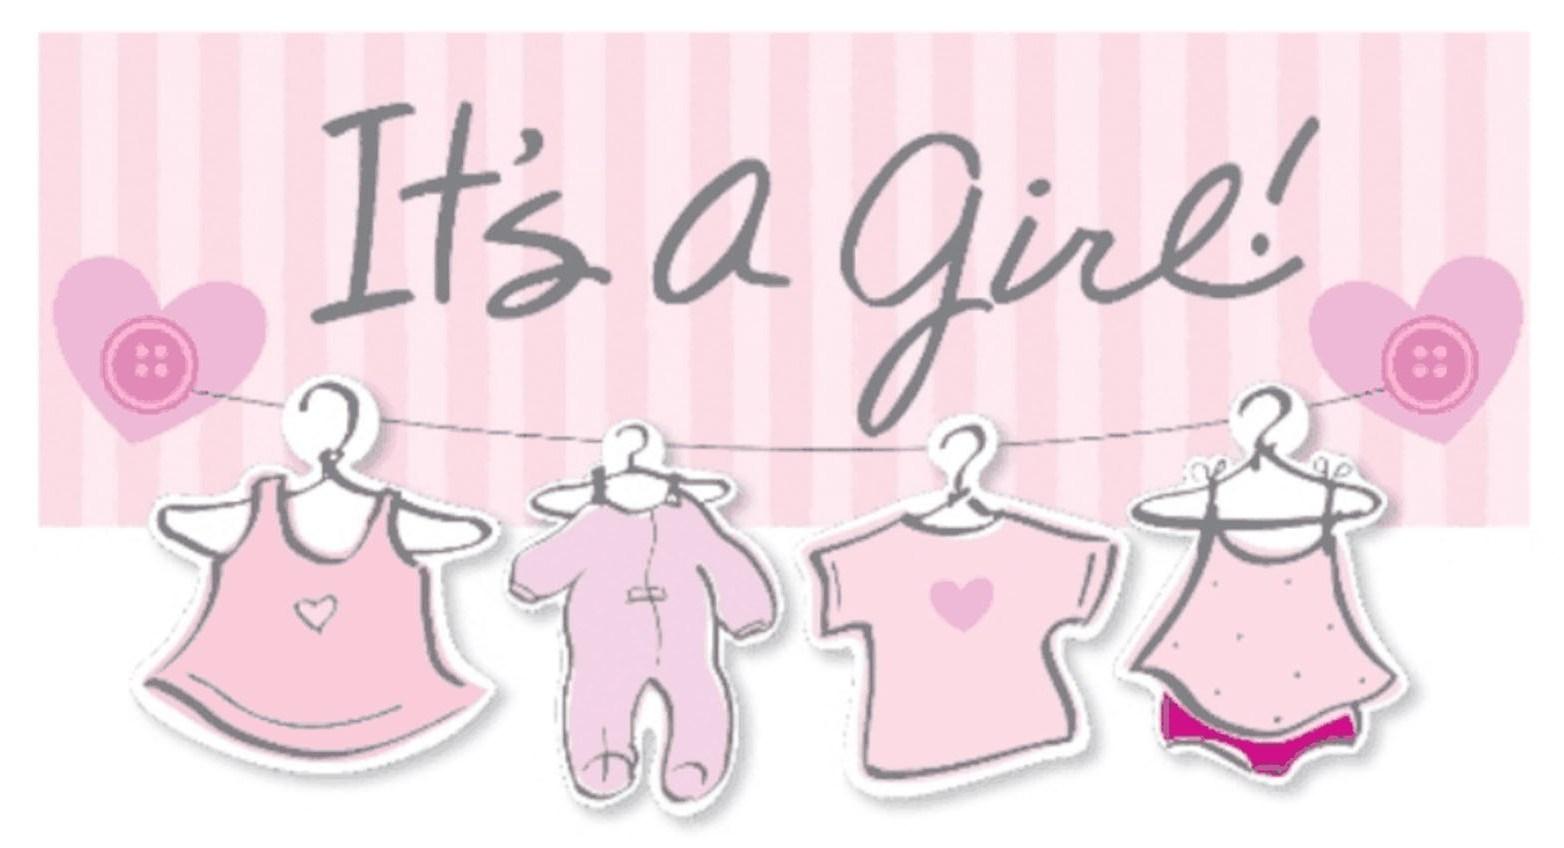 Pin on Free baby shower invitations